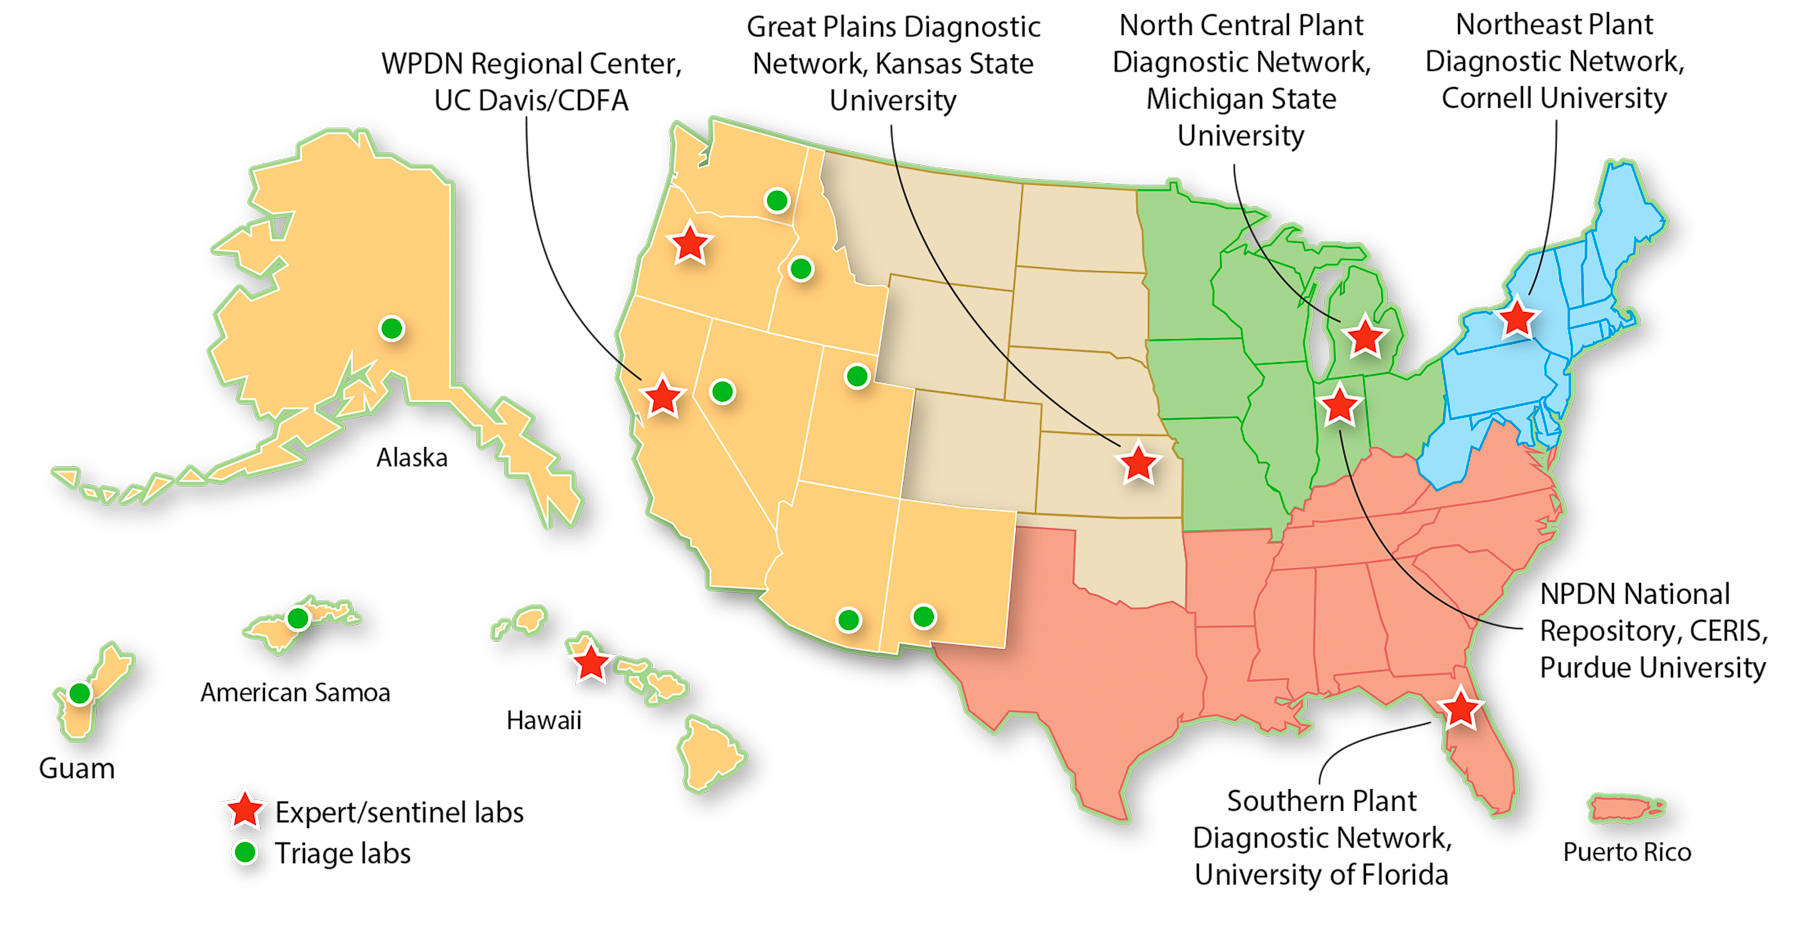 Organizational map of the National Plant Diagnostic Network with the five regional networks and the NPDN National Repository at Purdue University. The Western Plant Diagnostic Network (WPDN) includes 10 Western states and U.S. territories in the Pacific.